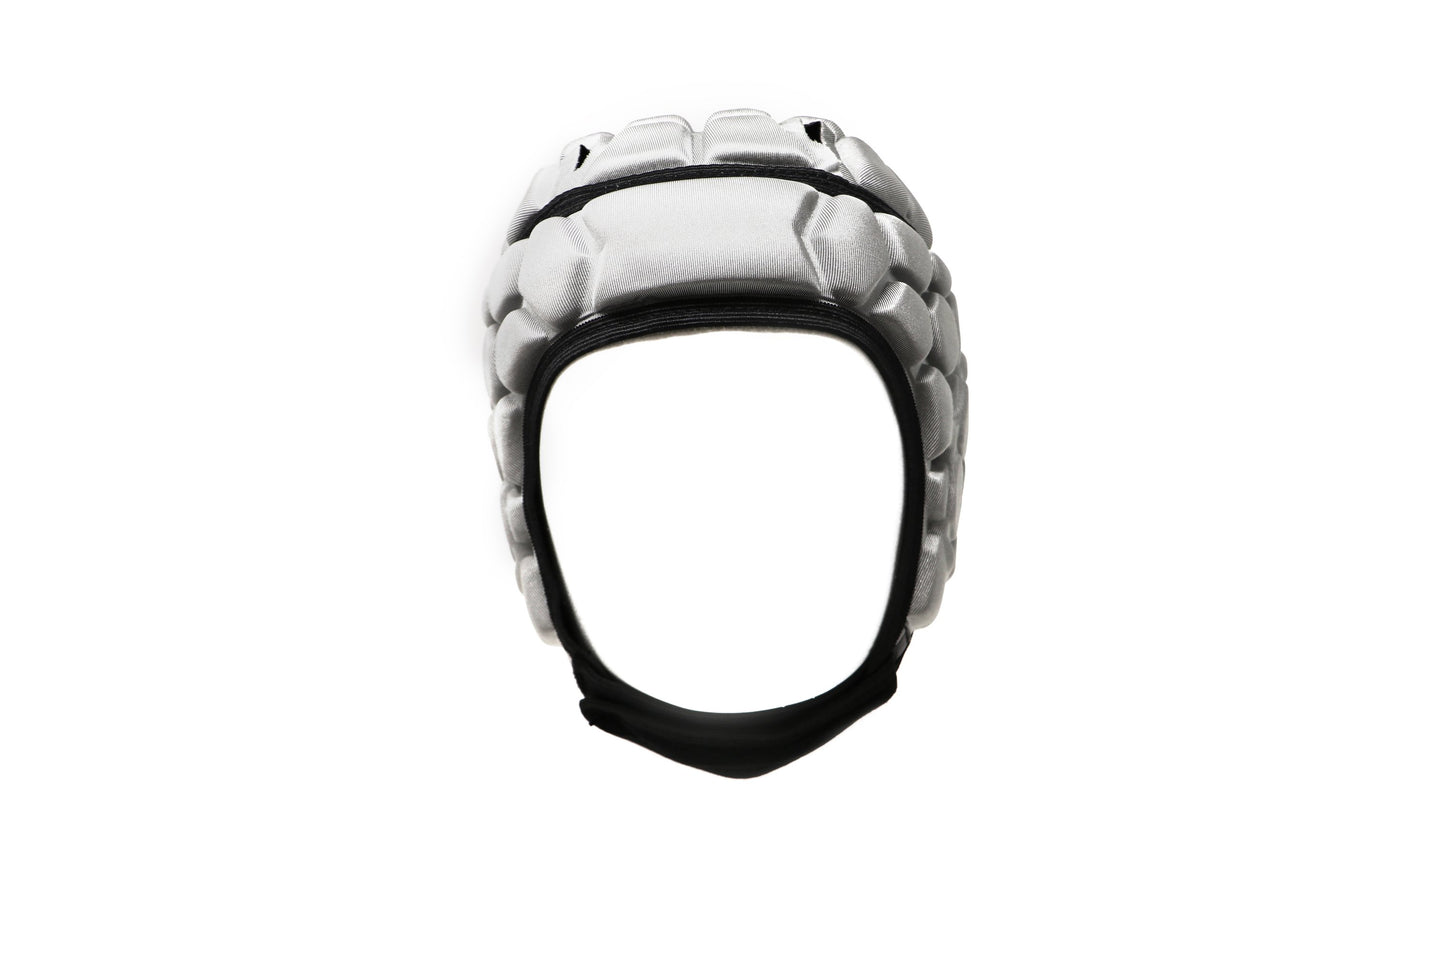 HEAT PRO Competition rugby headgear